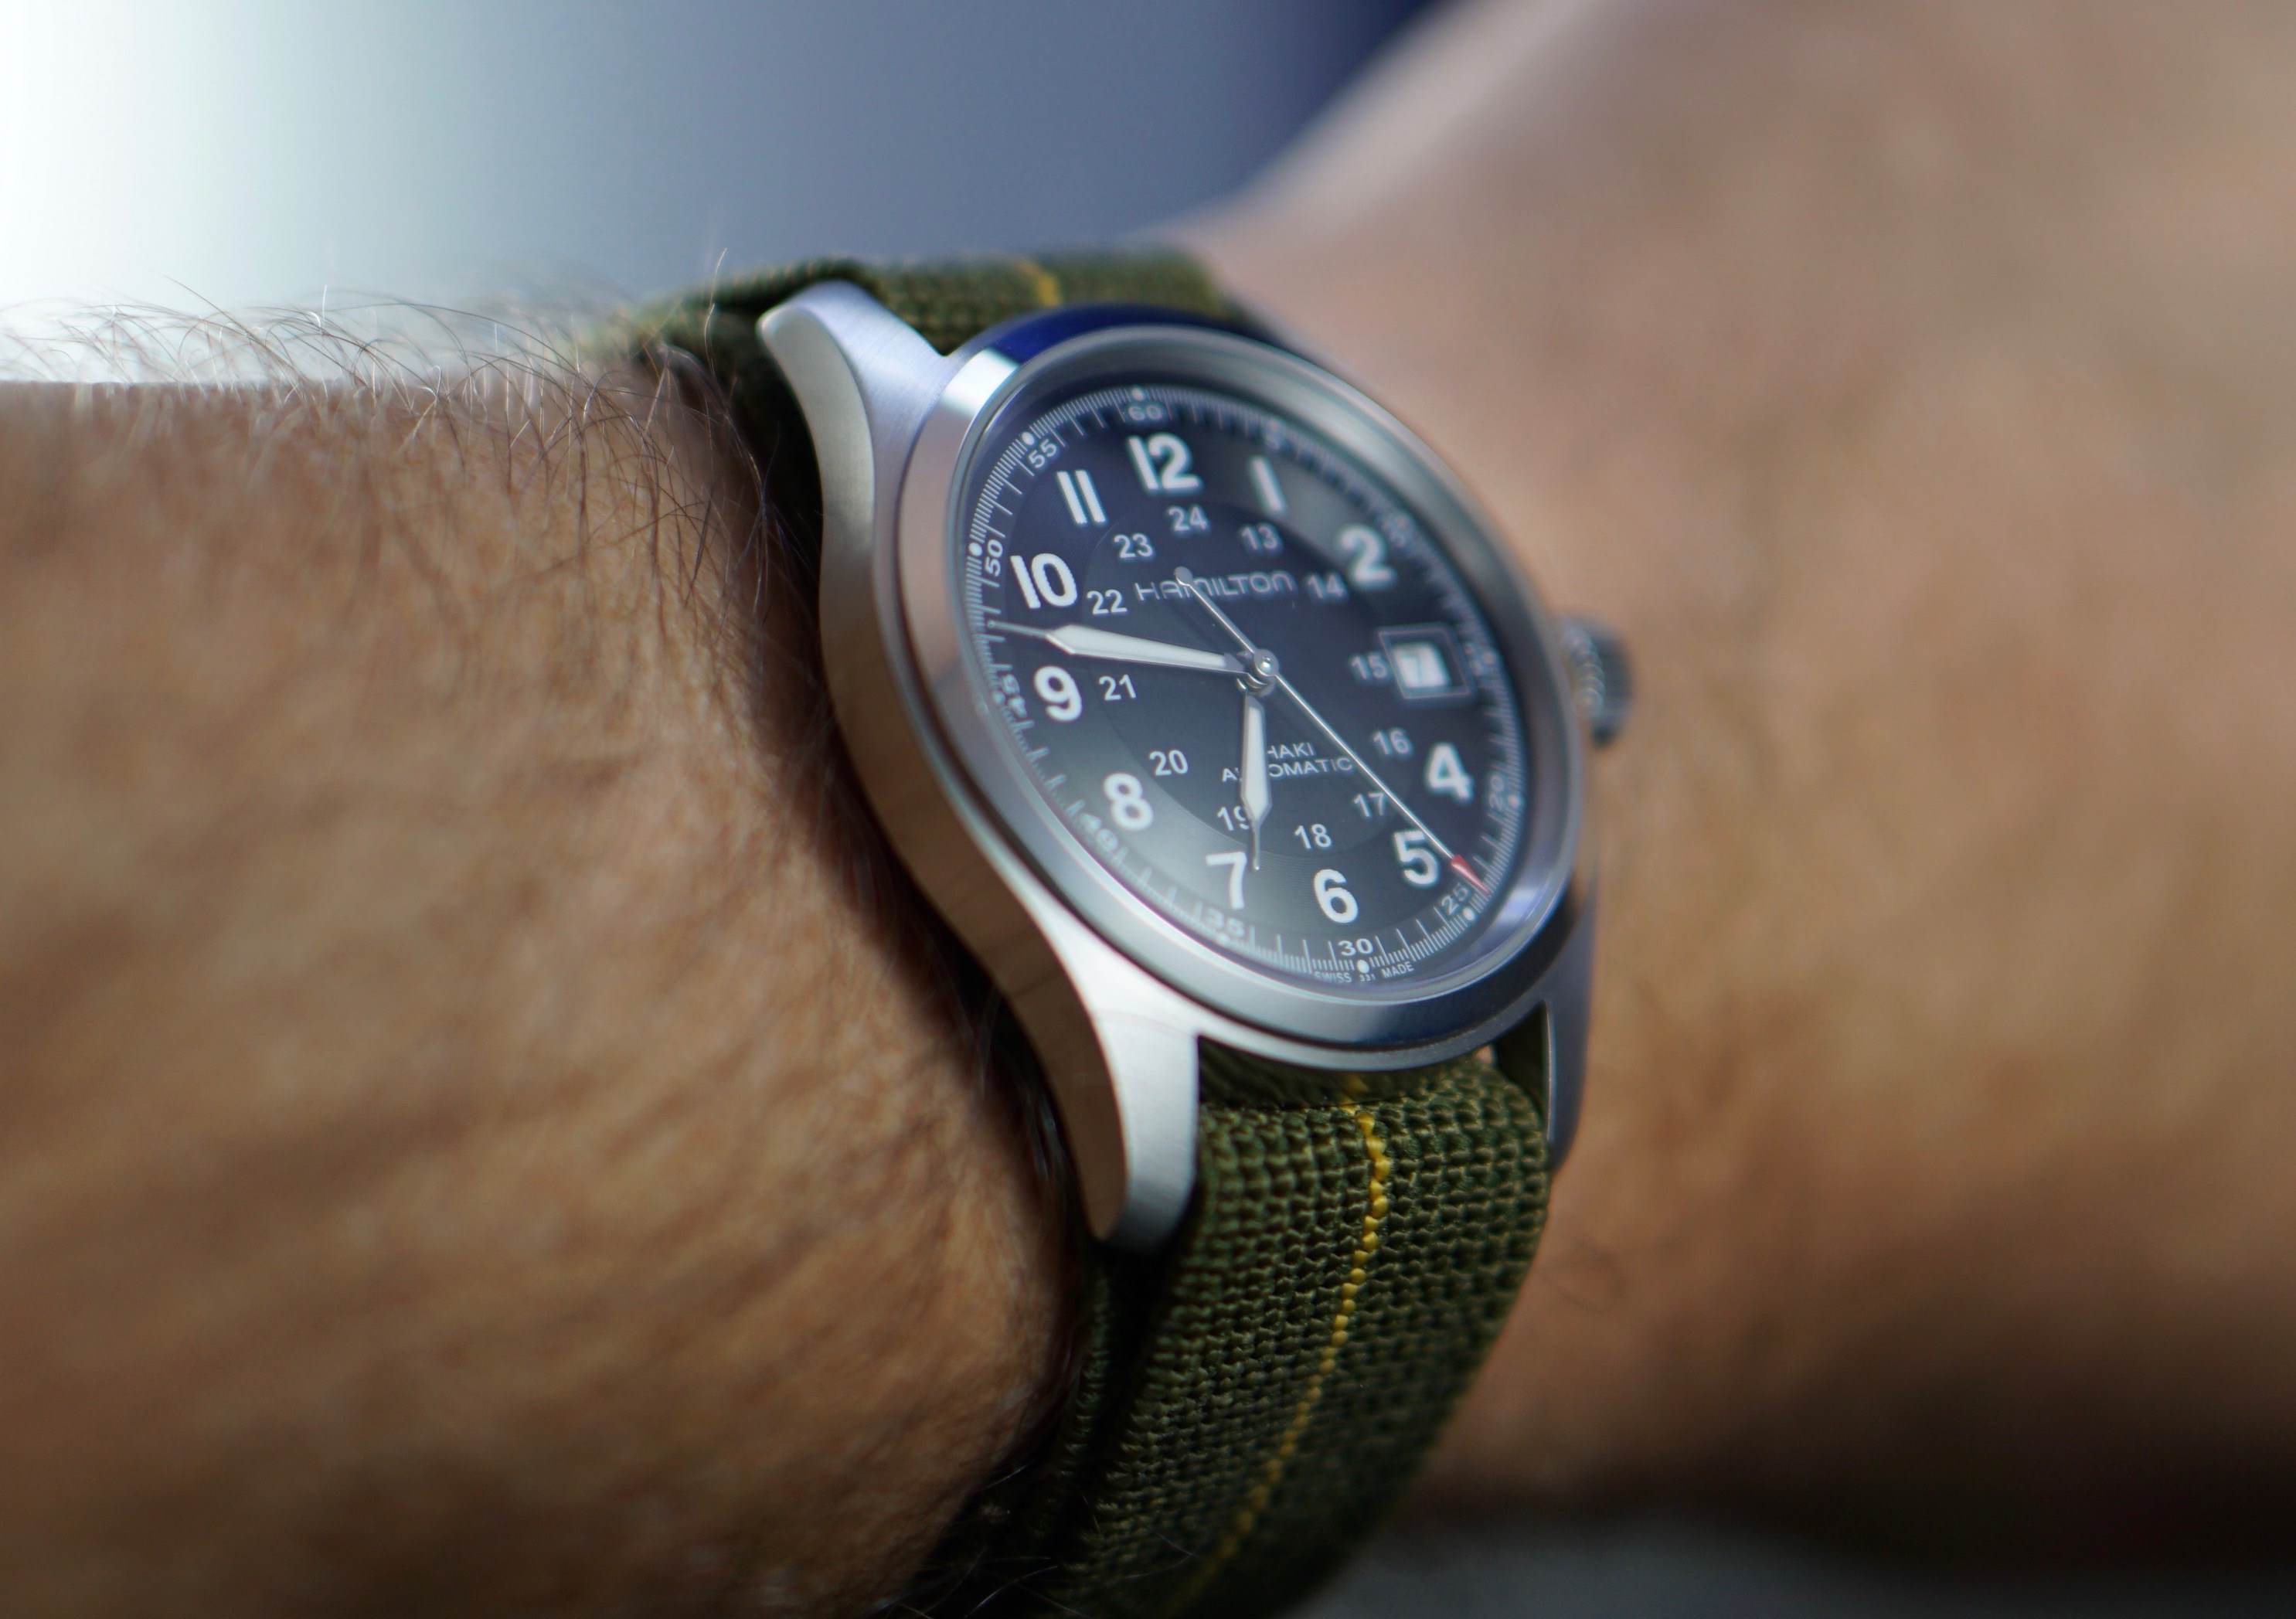 Real Watch, Real Man: Reasons Why It's Time to Invest in a Wrist Watch